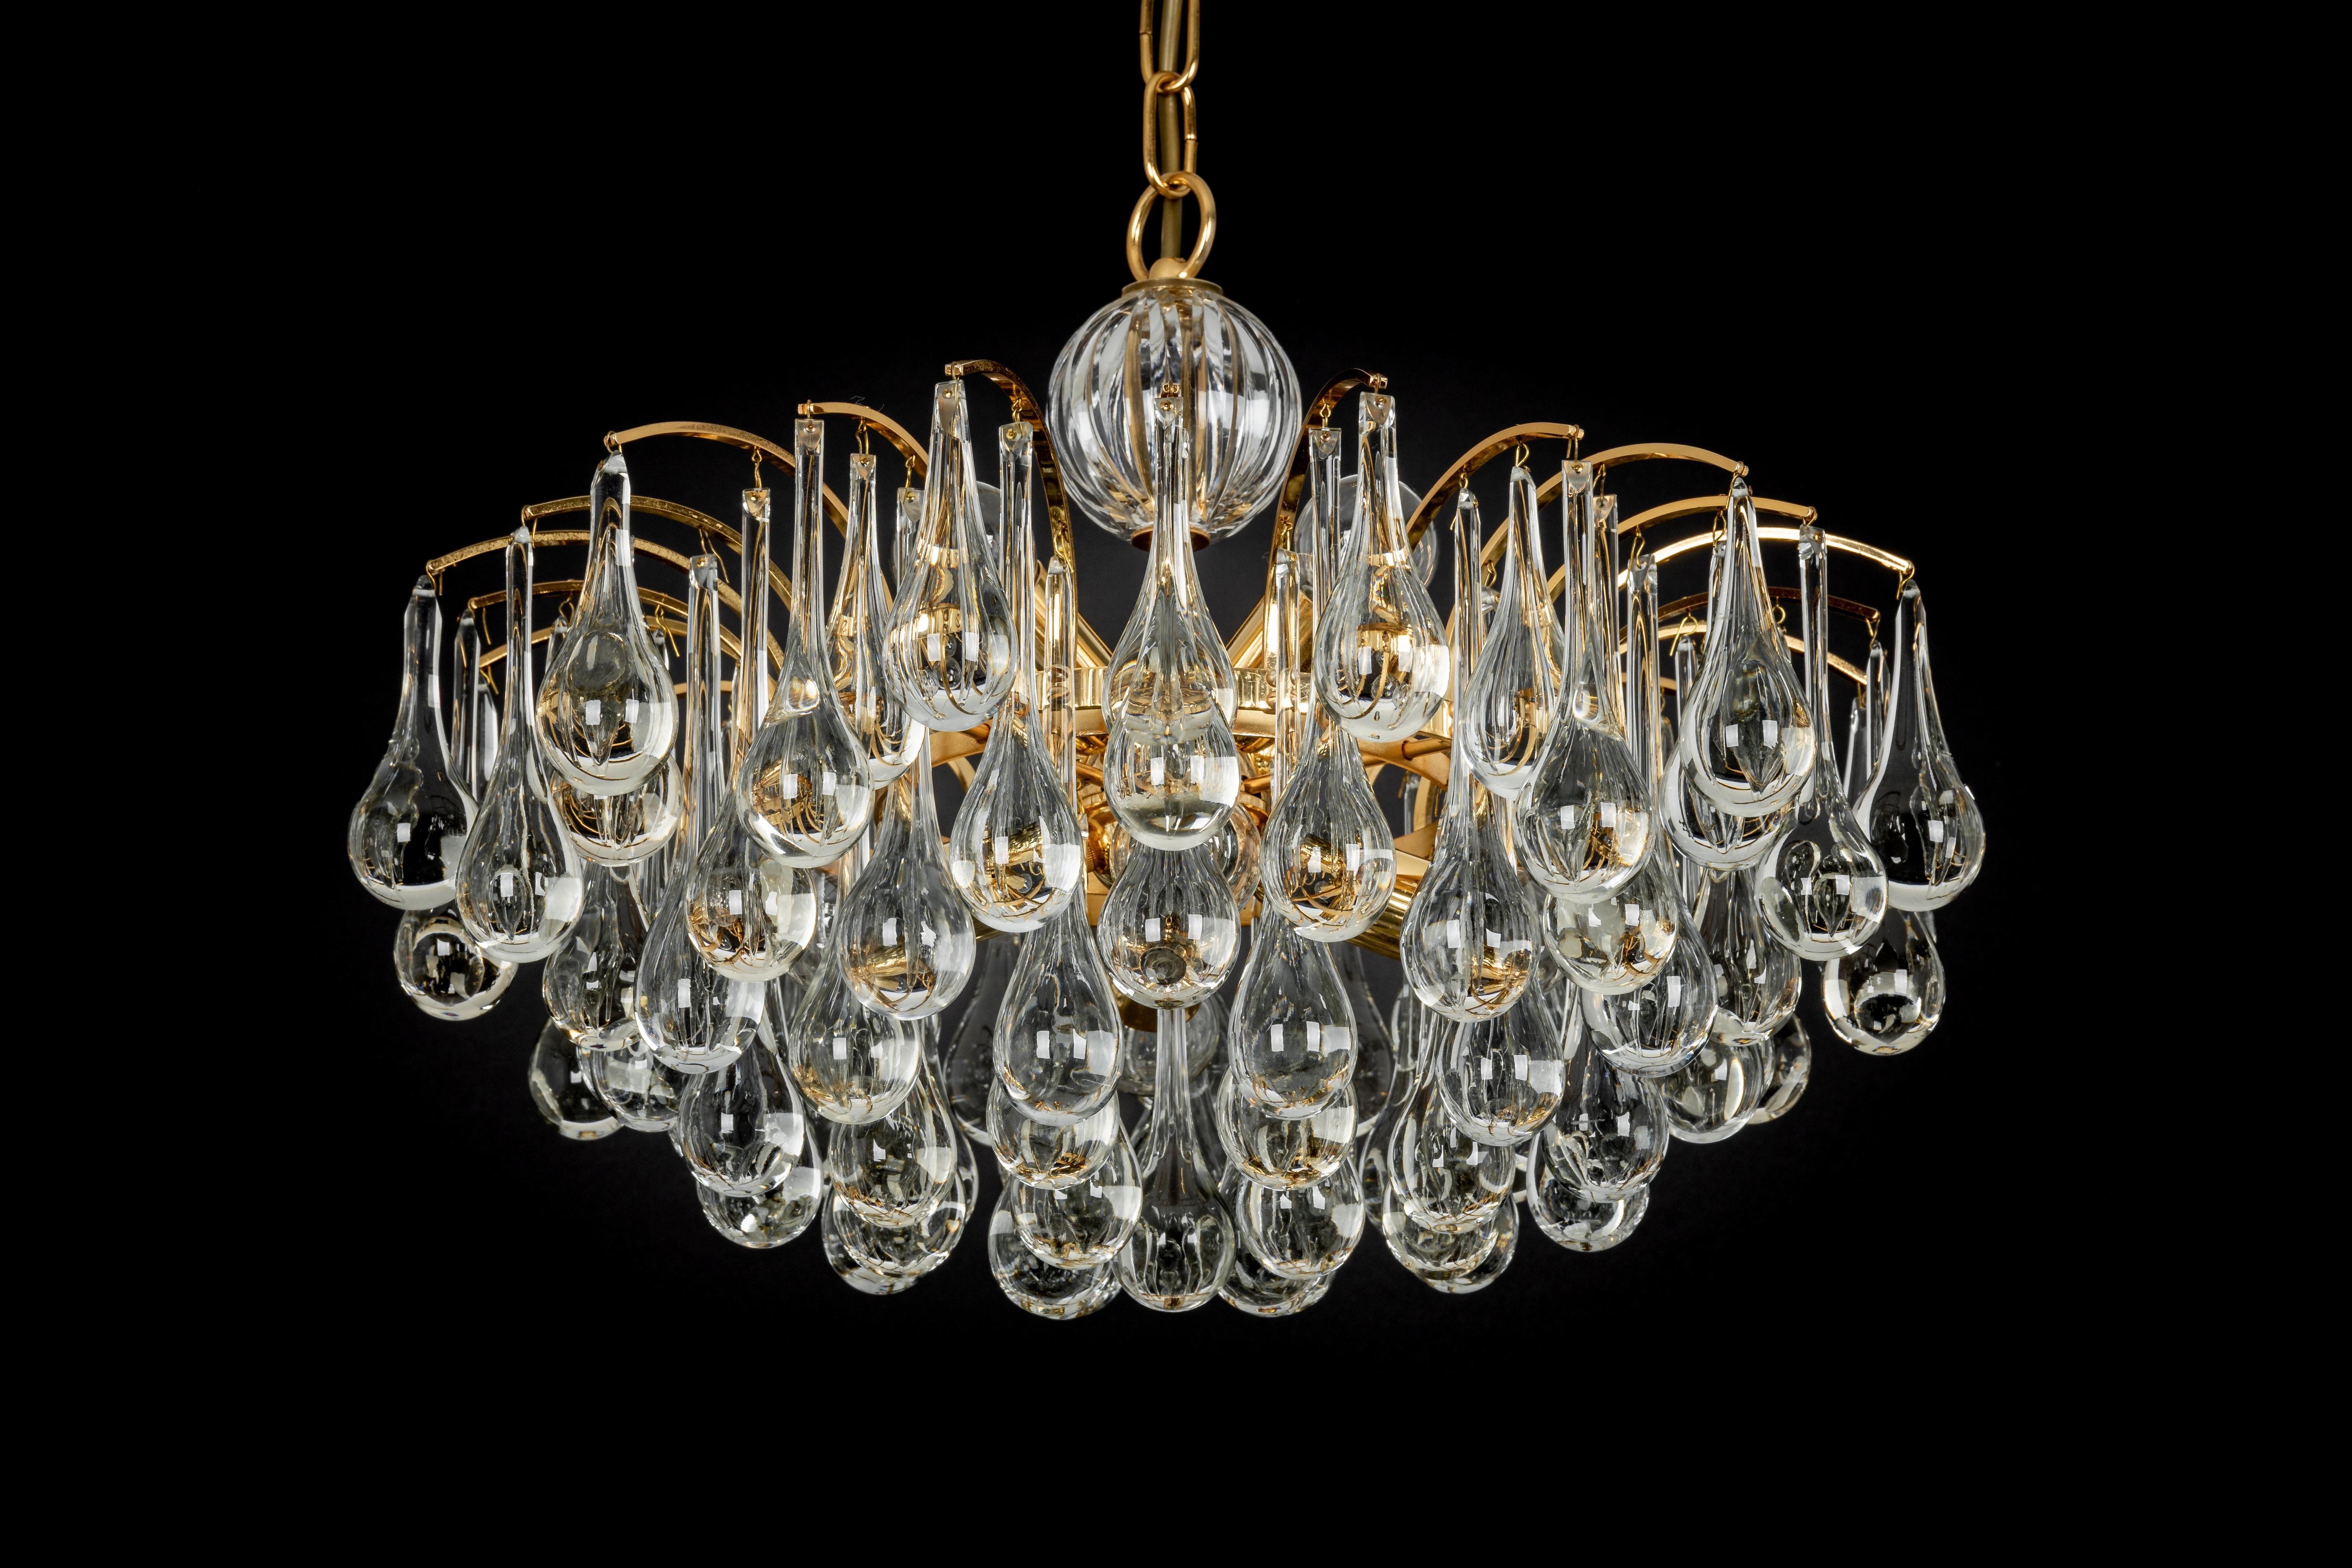 1 of 2 Large Murano Glass Tear Drop Chandelier, Christoph Palme, Germany, 1970s For Sale 8